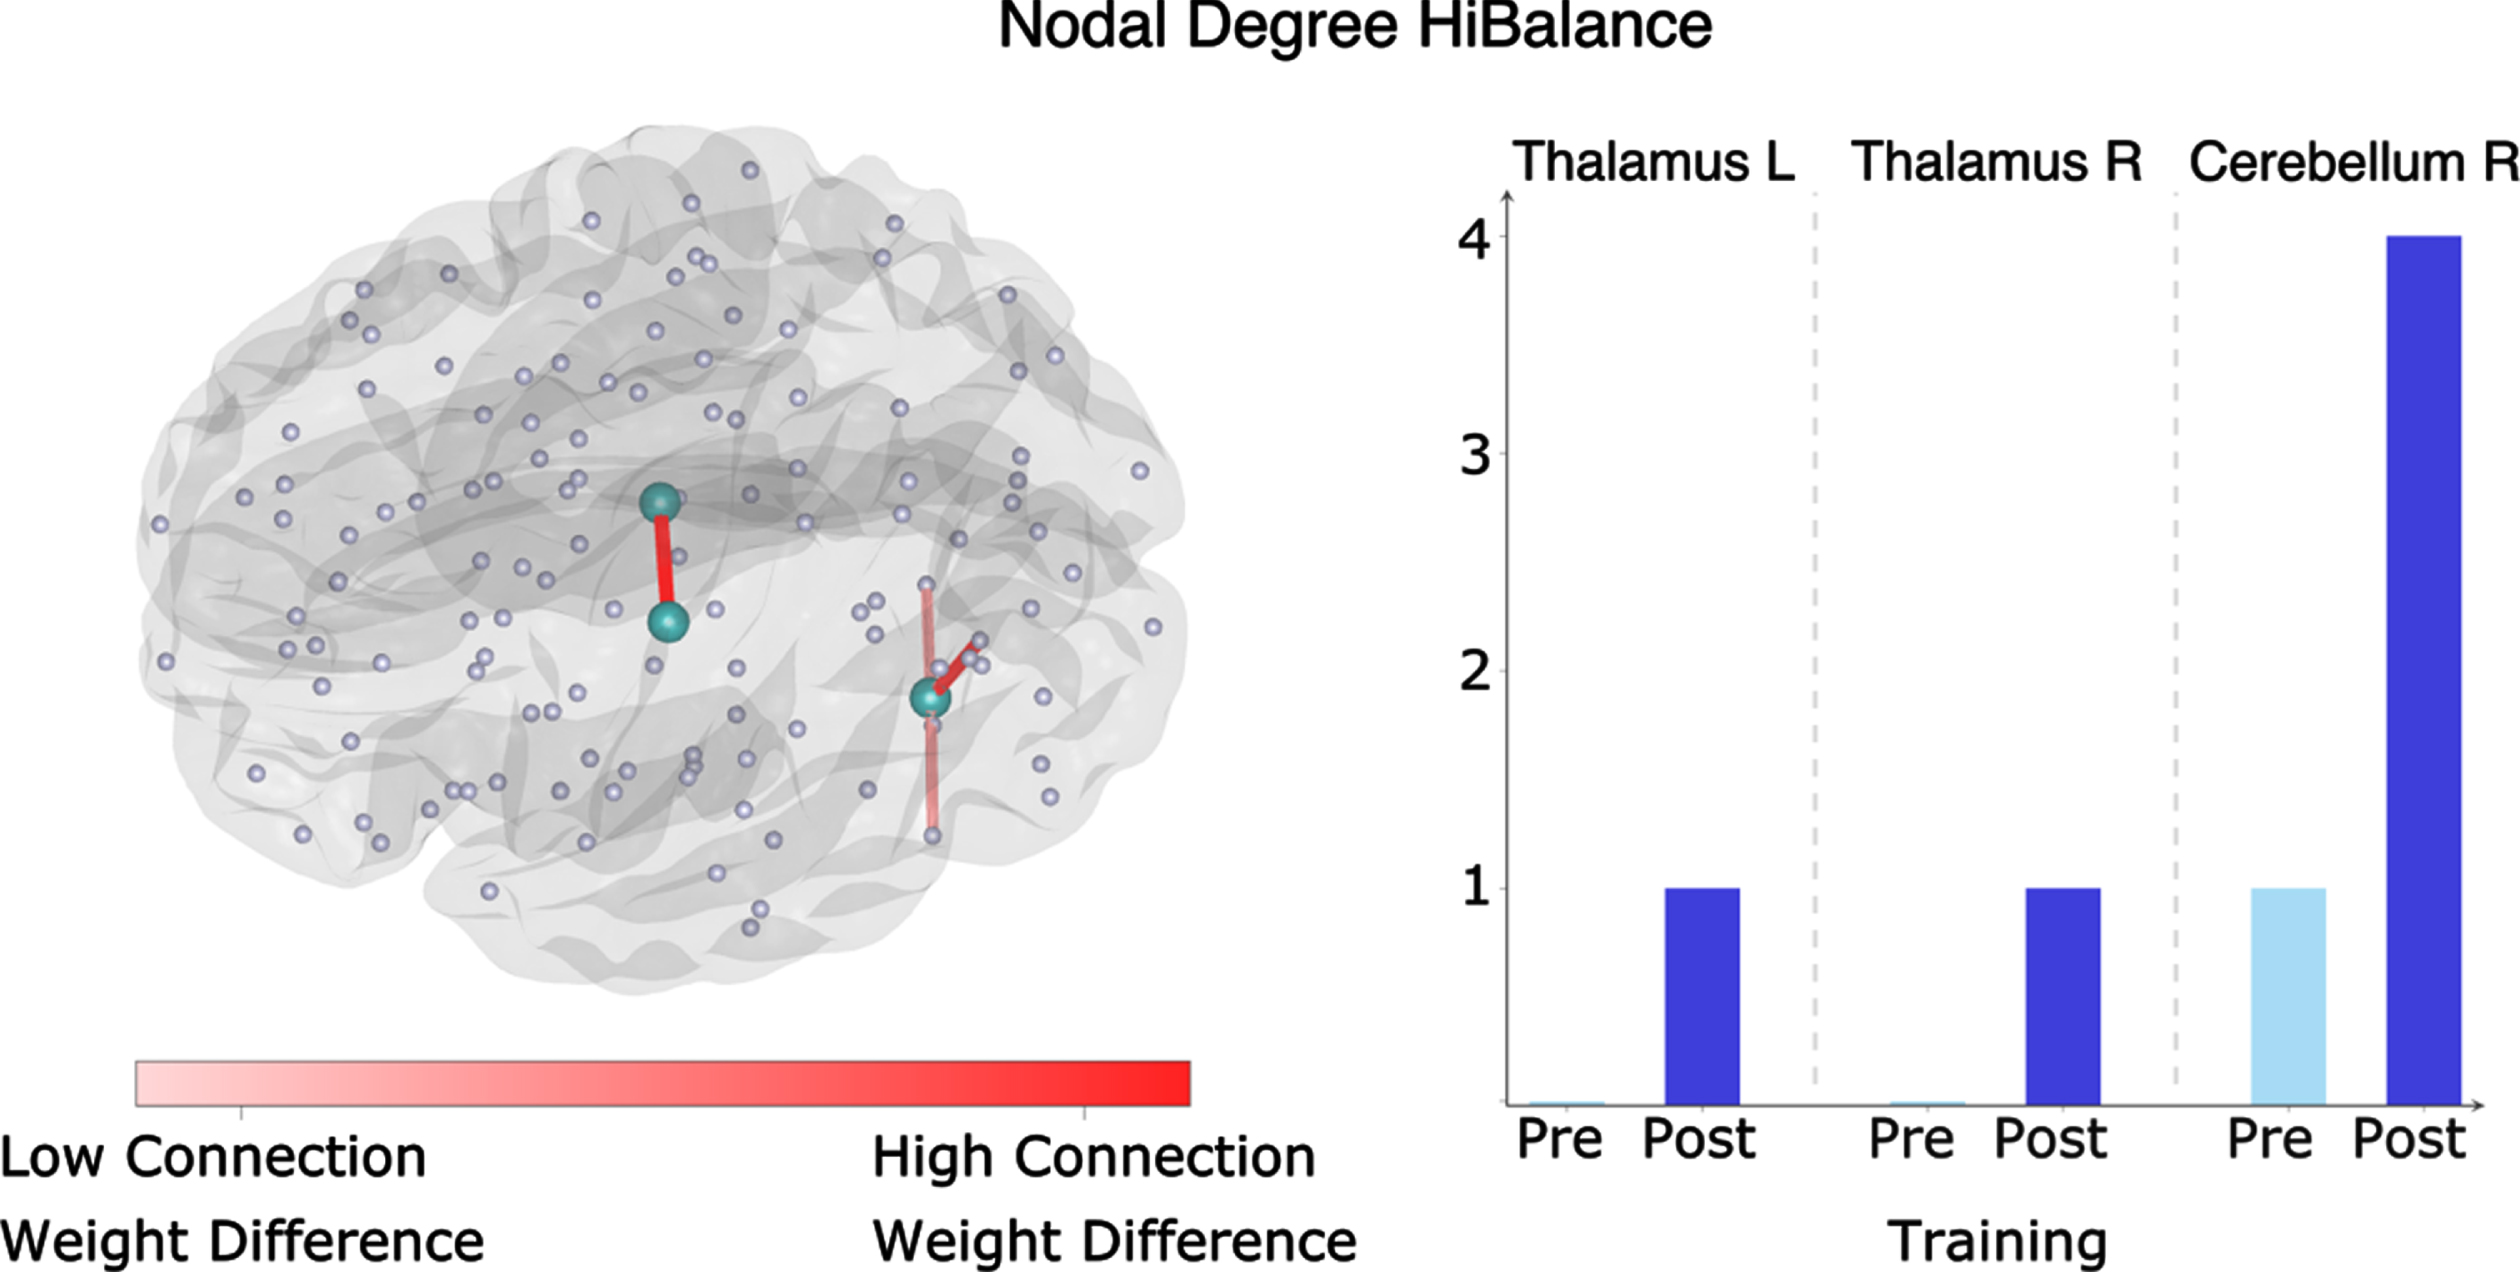 Nodal degree in the HiBalance cohort. Left side: changes in degree significant in three nodes (turquoise). In red are the connections shown that differed between before and after the HiBalance training program. Right side: diagram showing number of connections of the significant nodes before and after the training program. R, right; L, left.